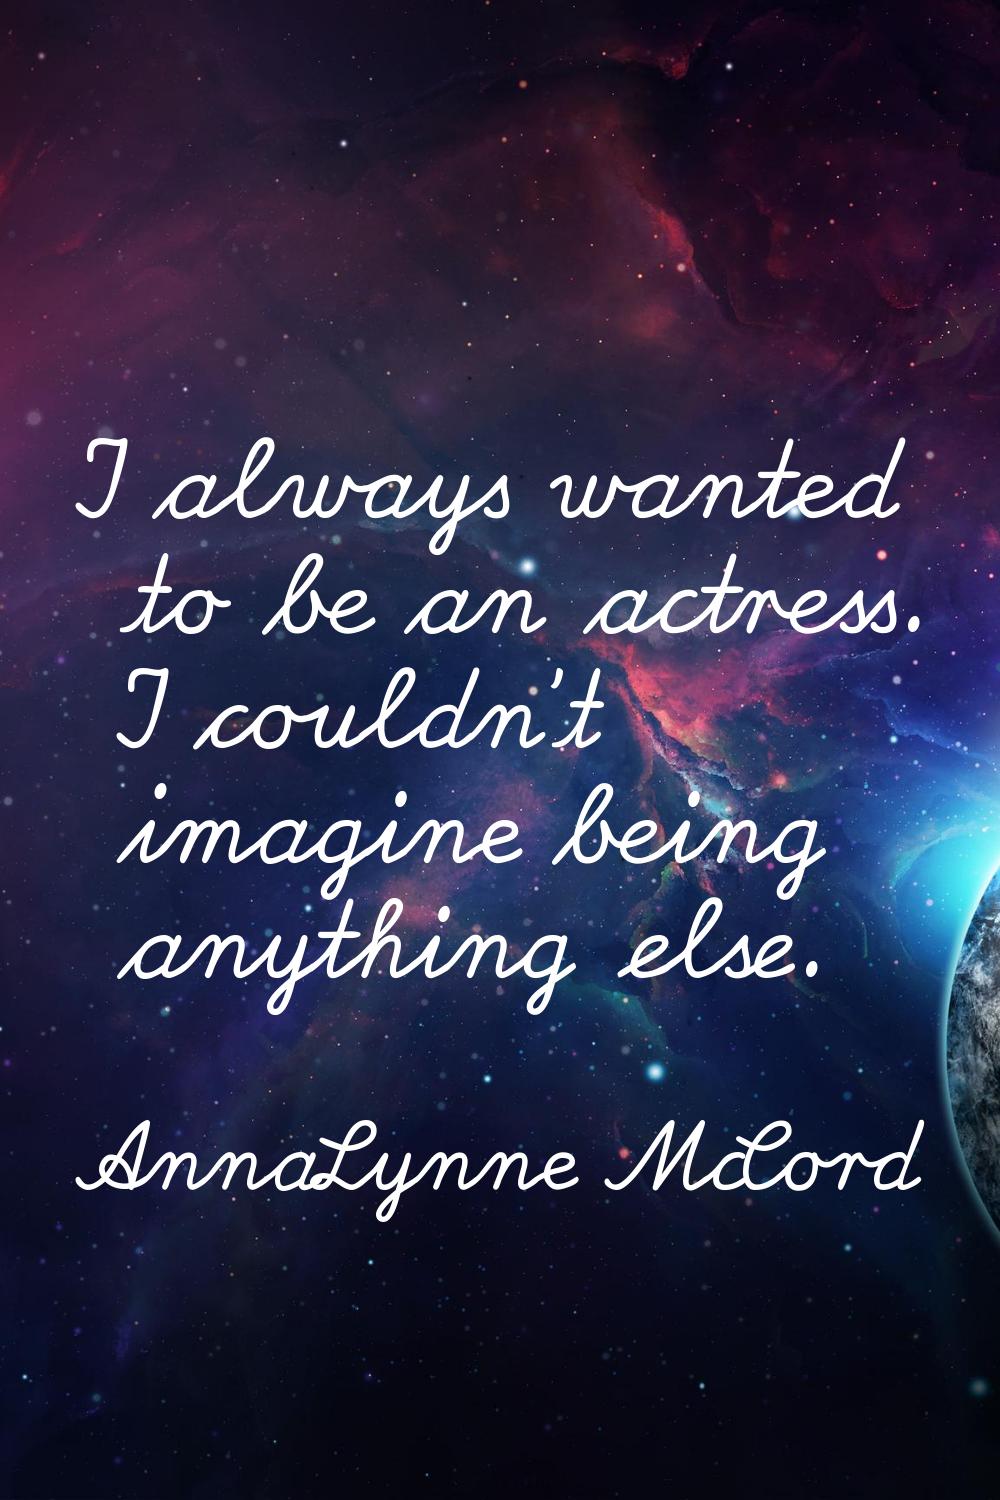 I always wanted to be an actress. I couldn't imagine being anything else.